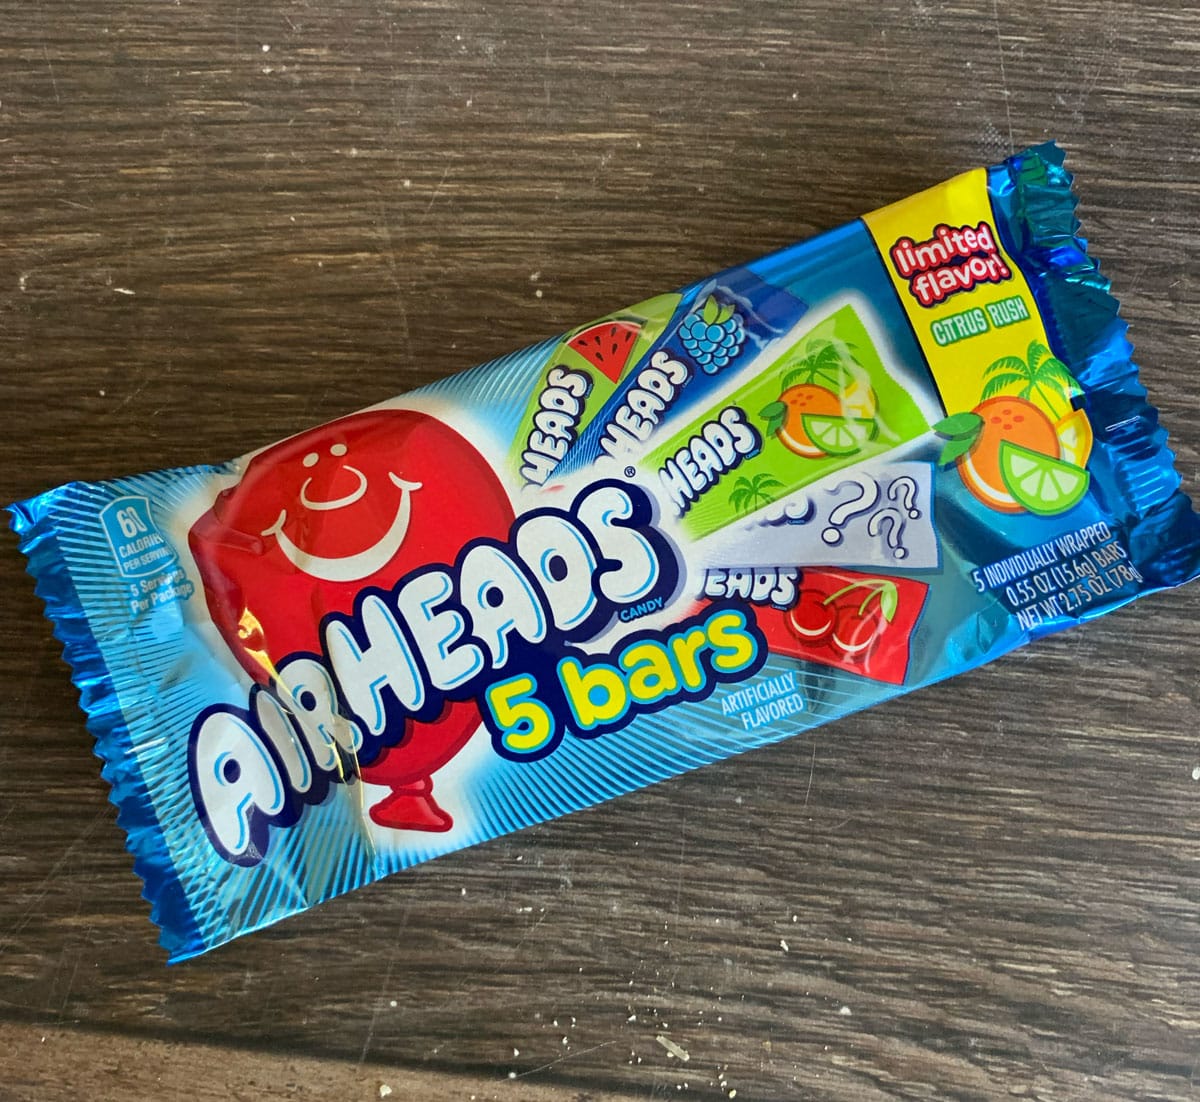 A package of airheads candy.